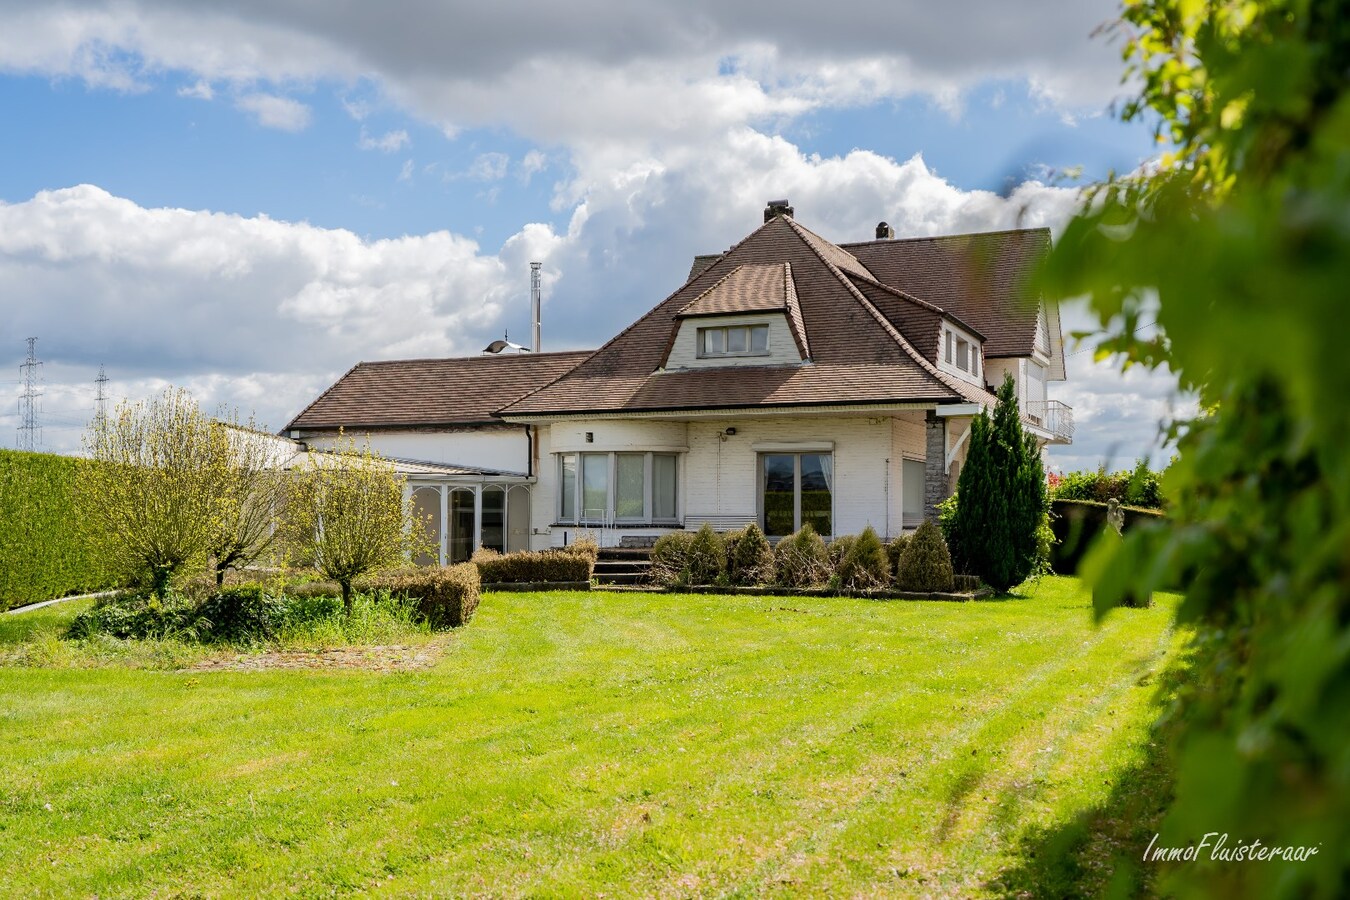 Unique property with two spacious houses on a plot of approximately 35 acres in Bilzen. 